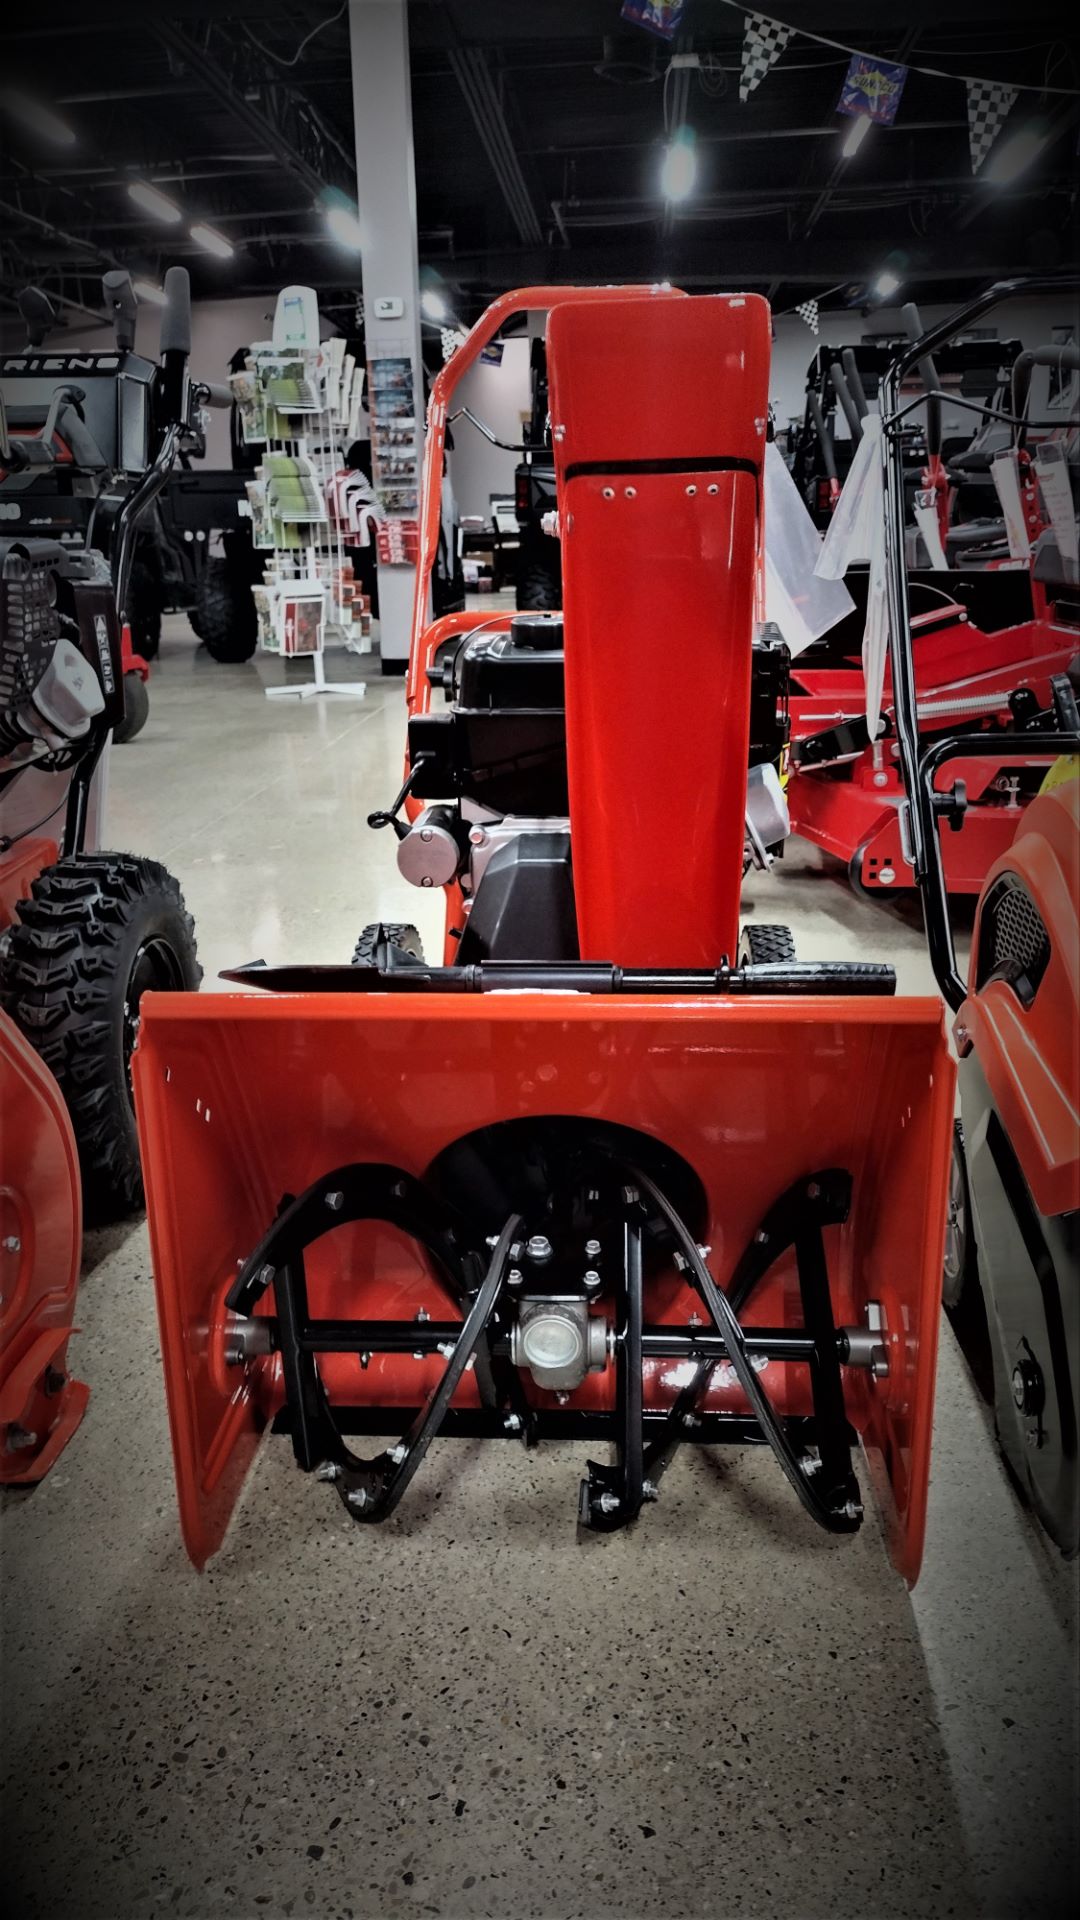 Ariens Crossover 20 in Lafayette, Indiana - Photo 1